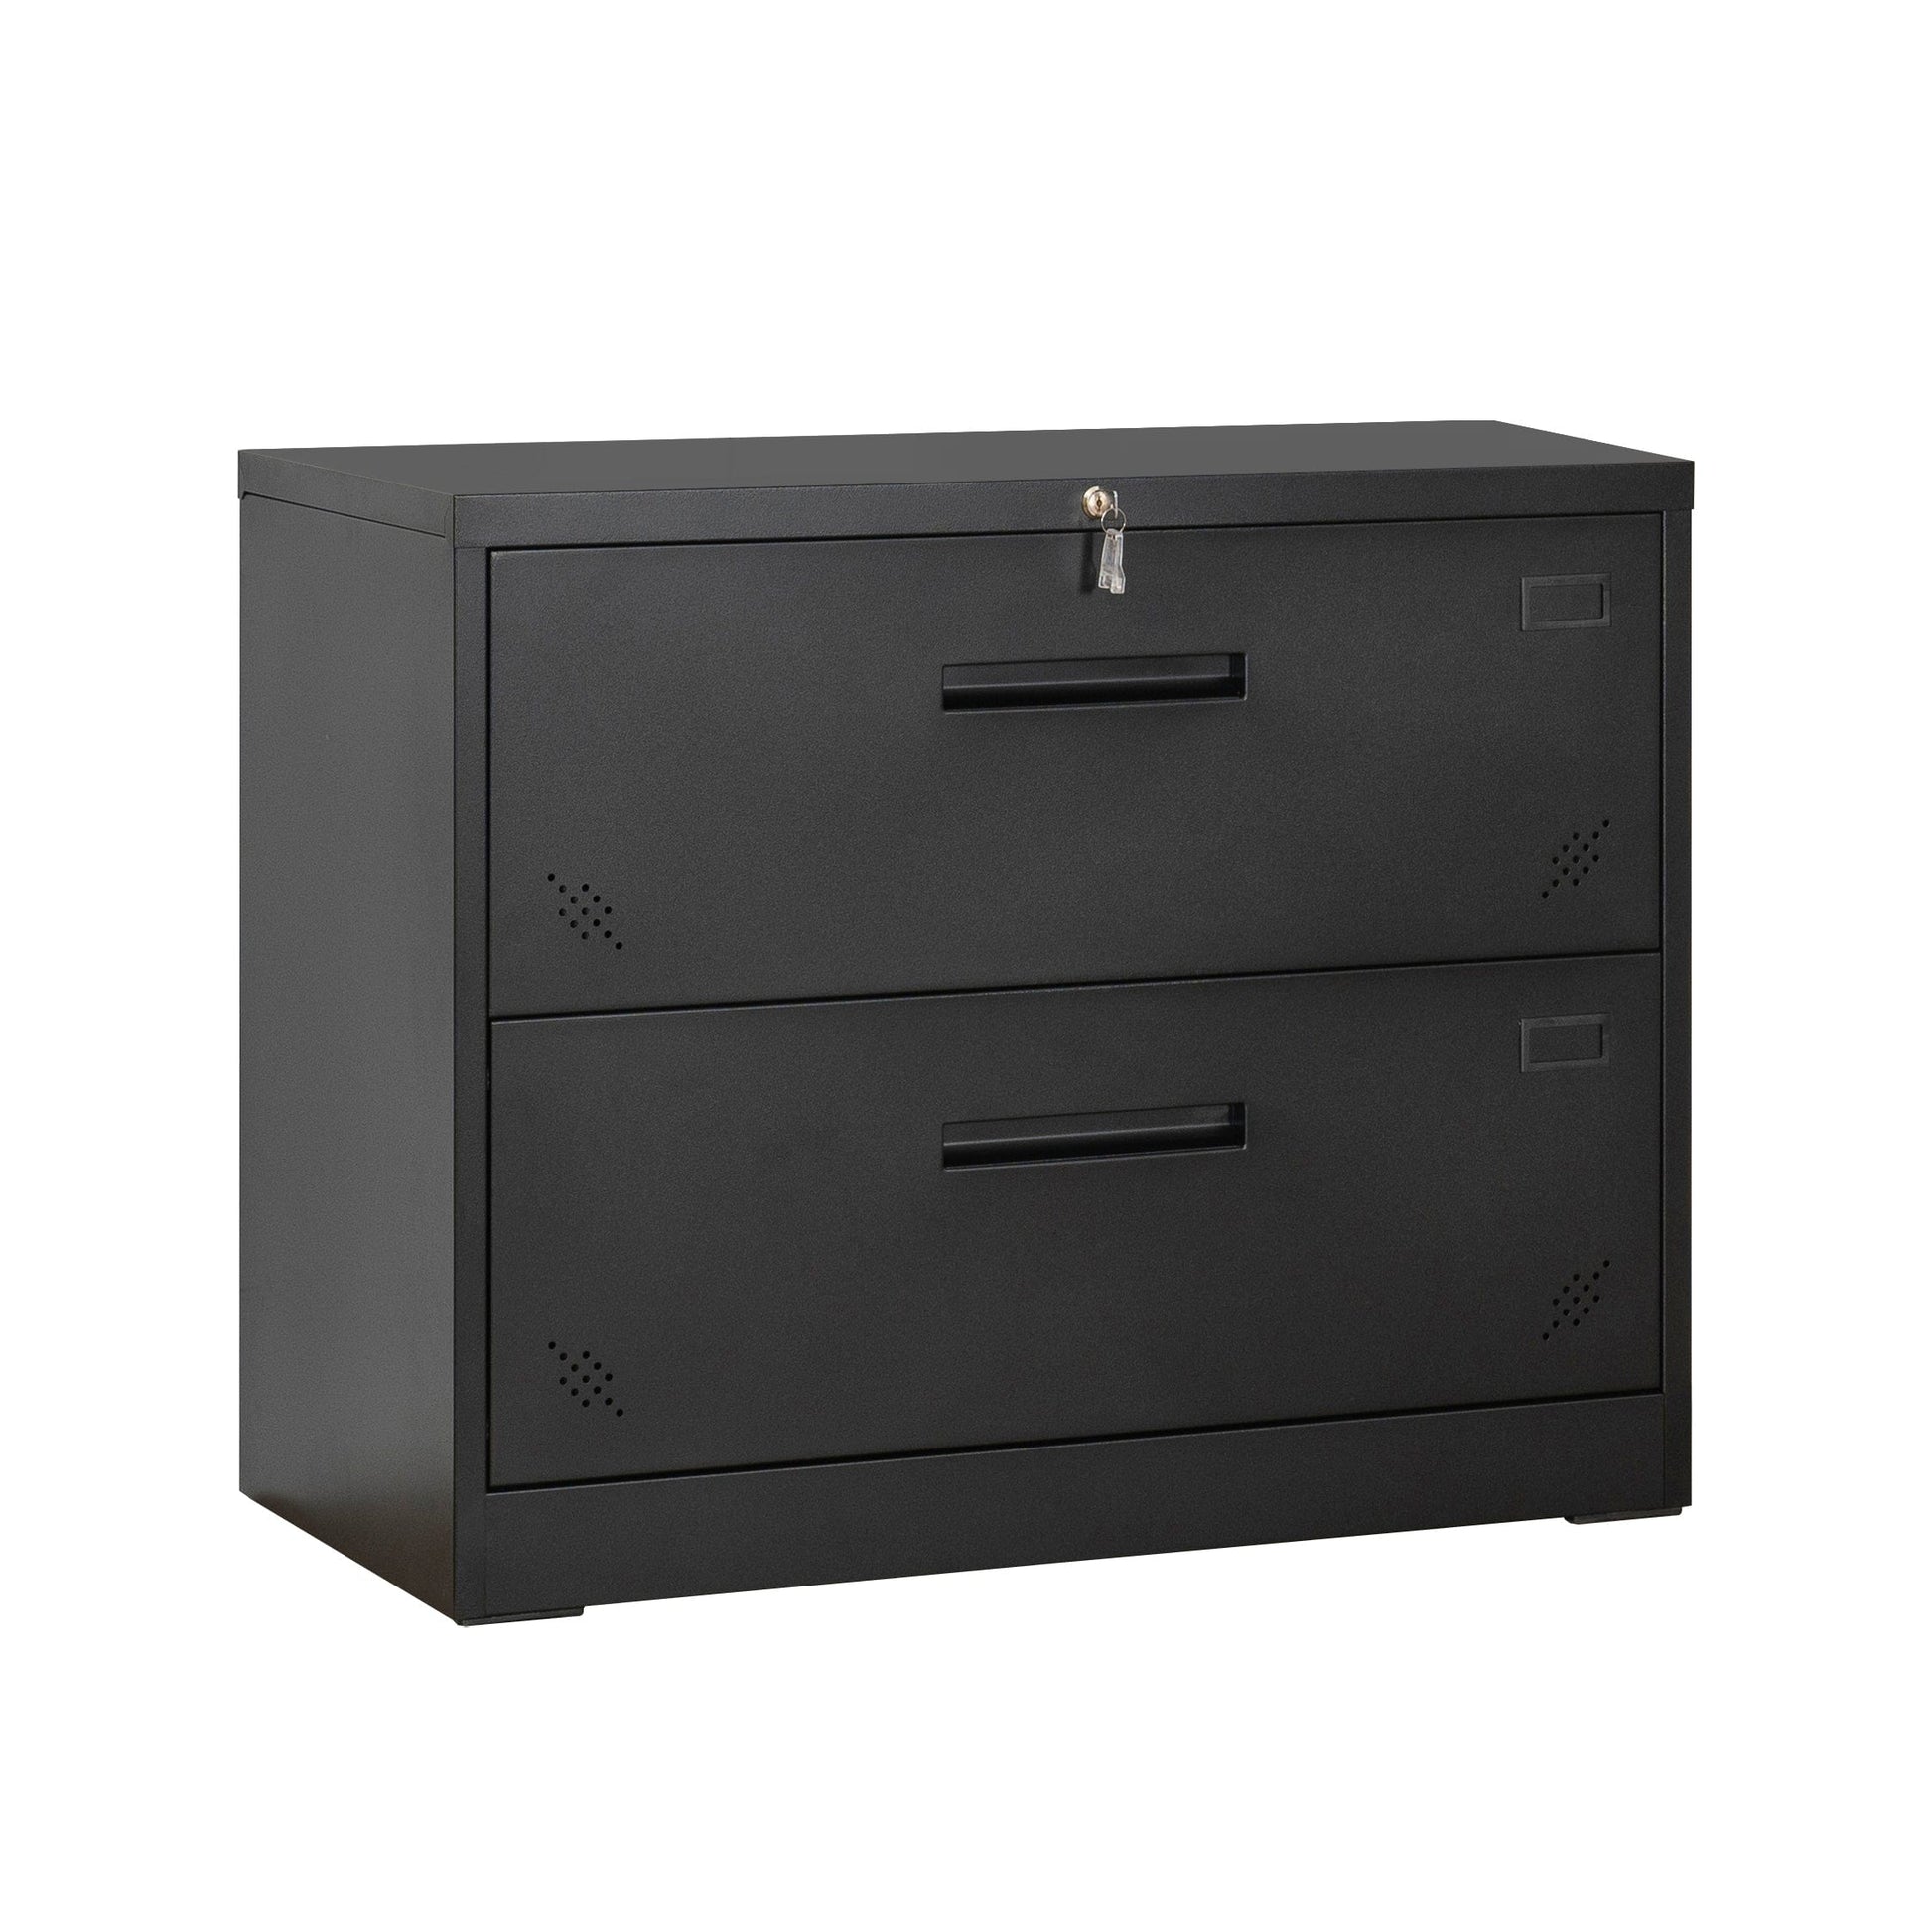 2 Drawer Lateral File Cabinet with Lock - Durable Metal Filing Cabinet for  Home Office - Holds Letter/Legal/F4/A4 Size Files 